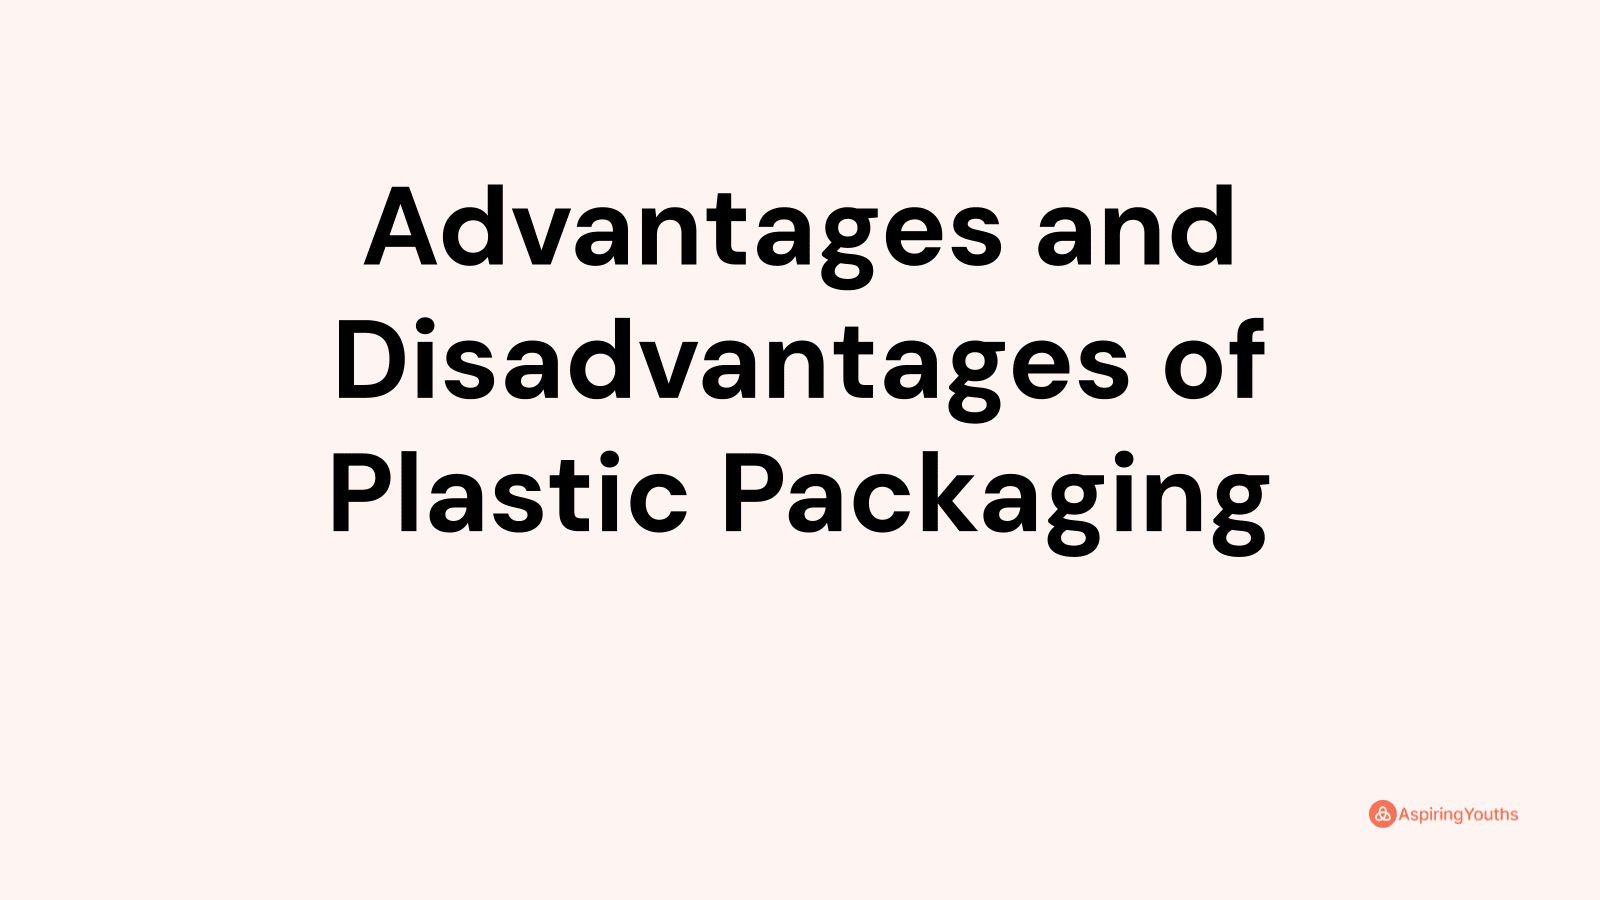 Advantages and disadvantages of Plastic Packaging